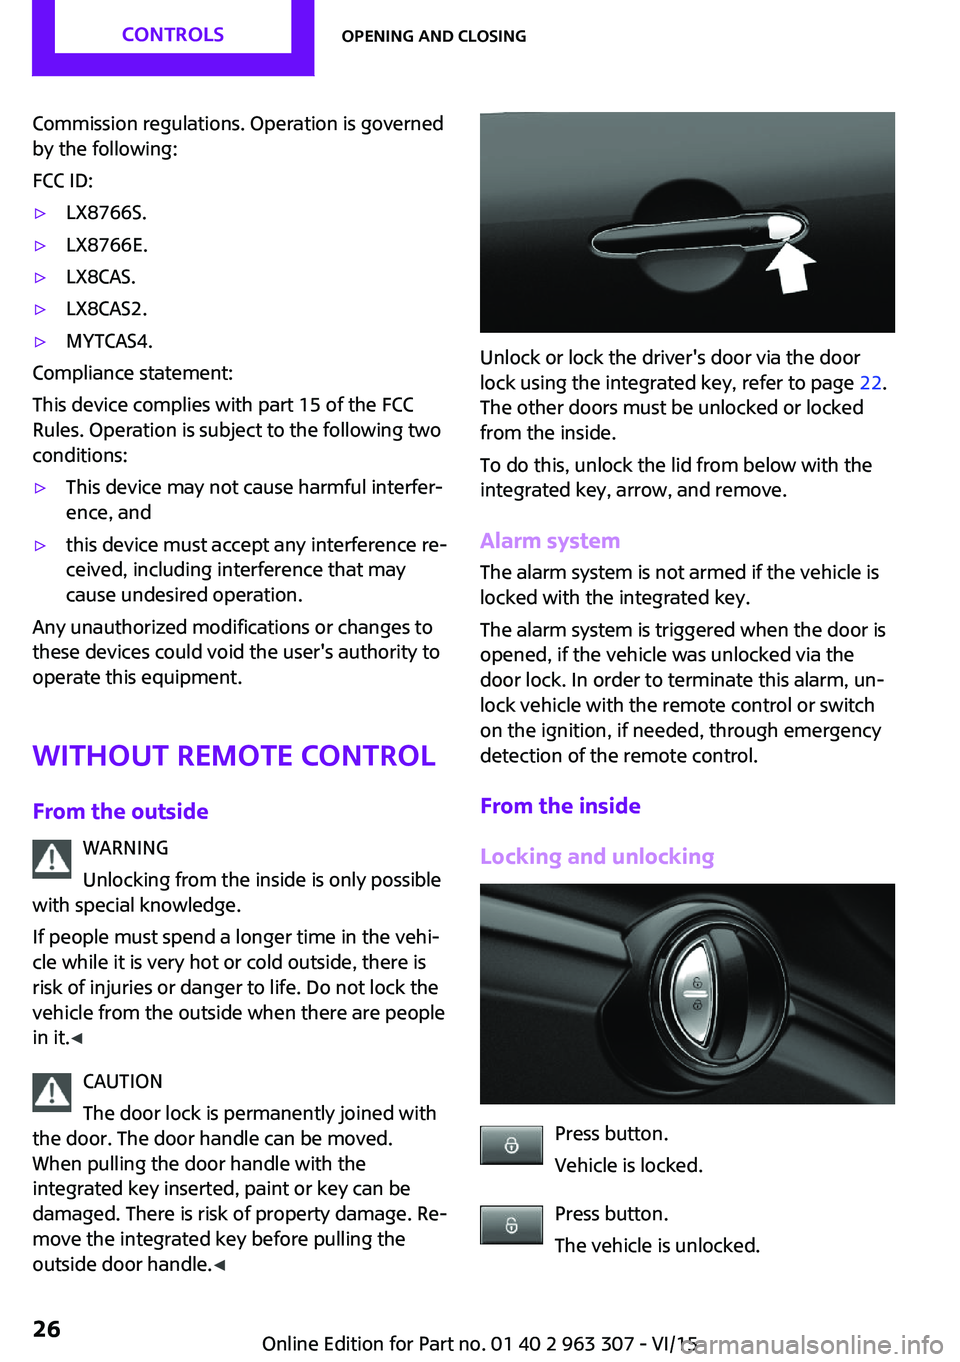 MINI COOPER 2016  Owners Manual Commission regulations. Operation is governed
by the following:
FCC ID:▷LX8766S.▷LX8766E.▷LX8CAS.▷LX8CAS2.▷MYTCAS4.
Compliance statement:
This device complies with part 15 of the FCC
Rules. 